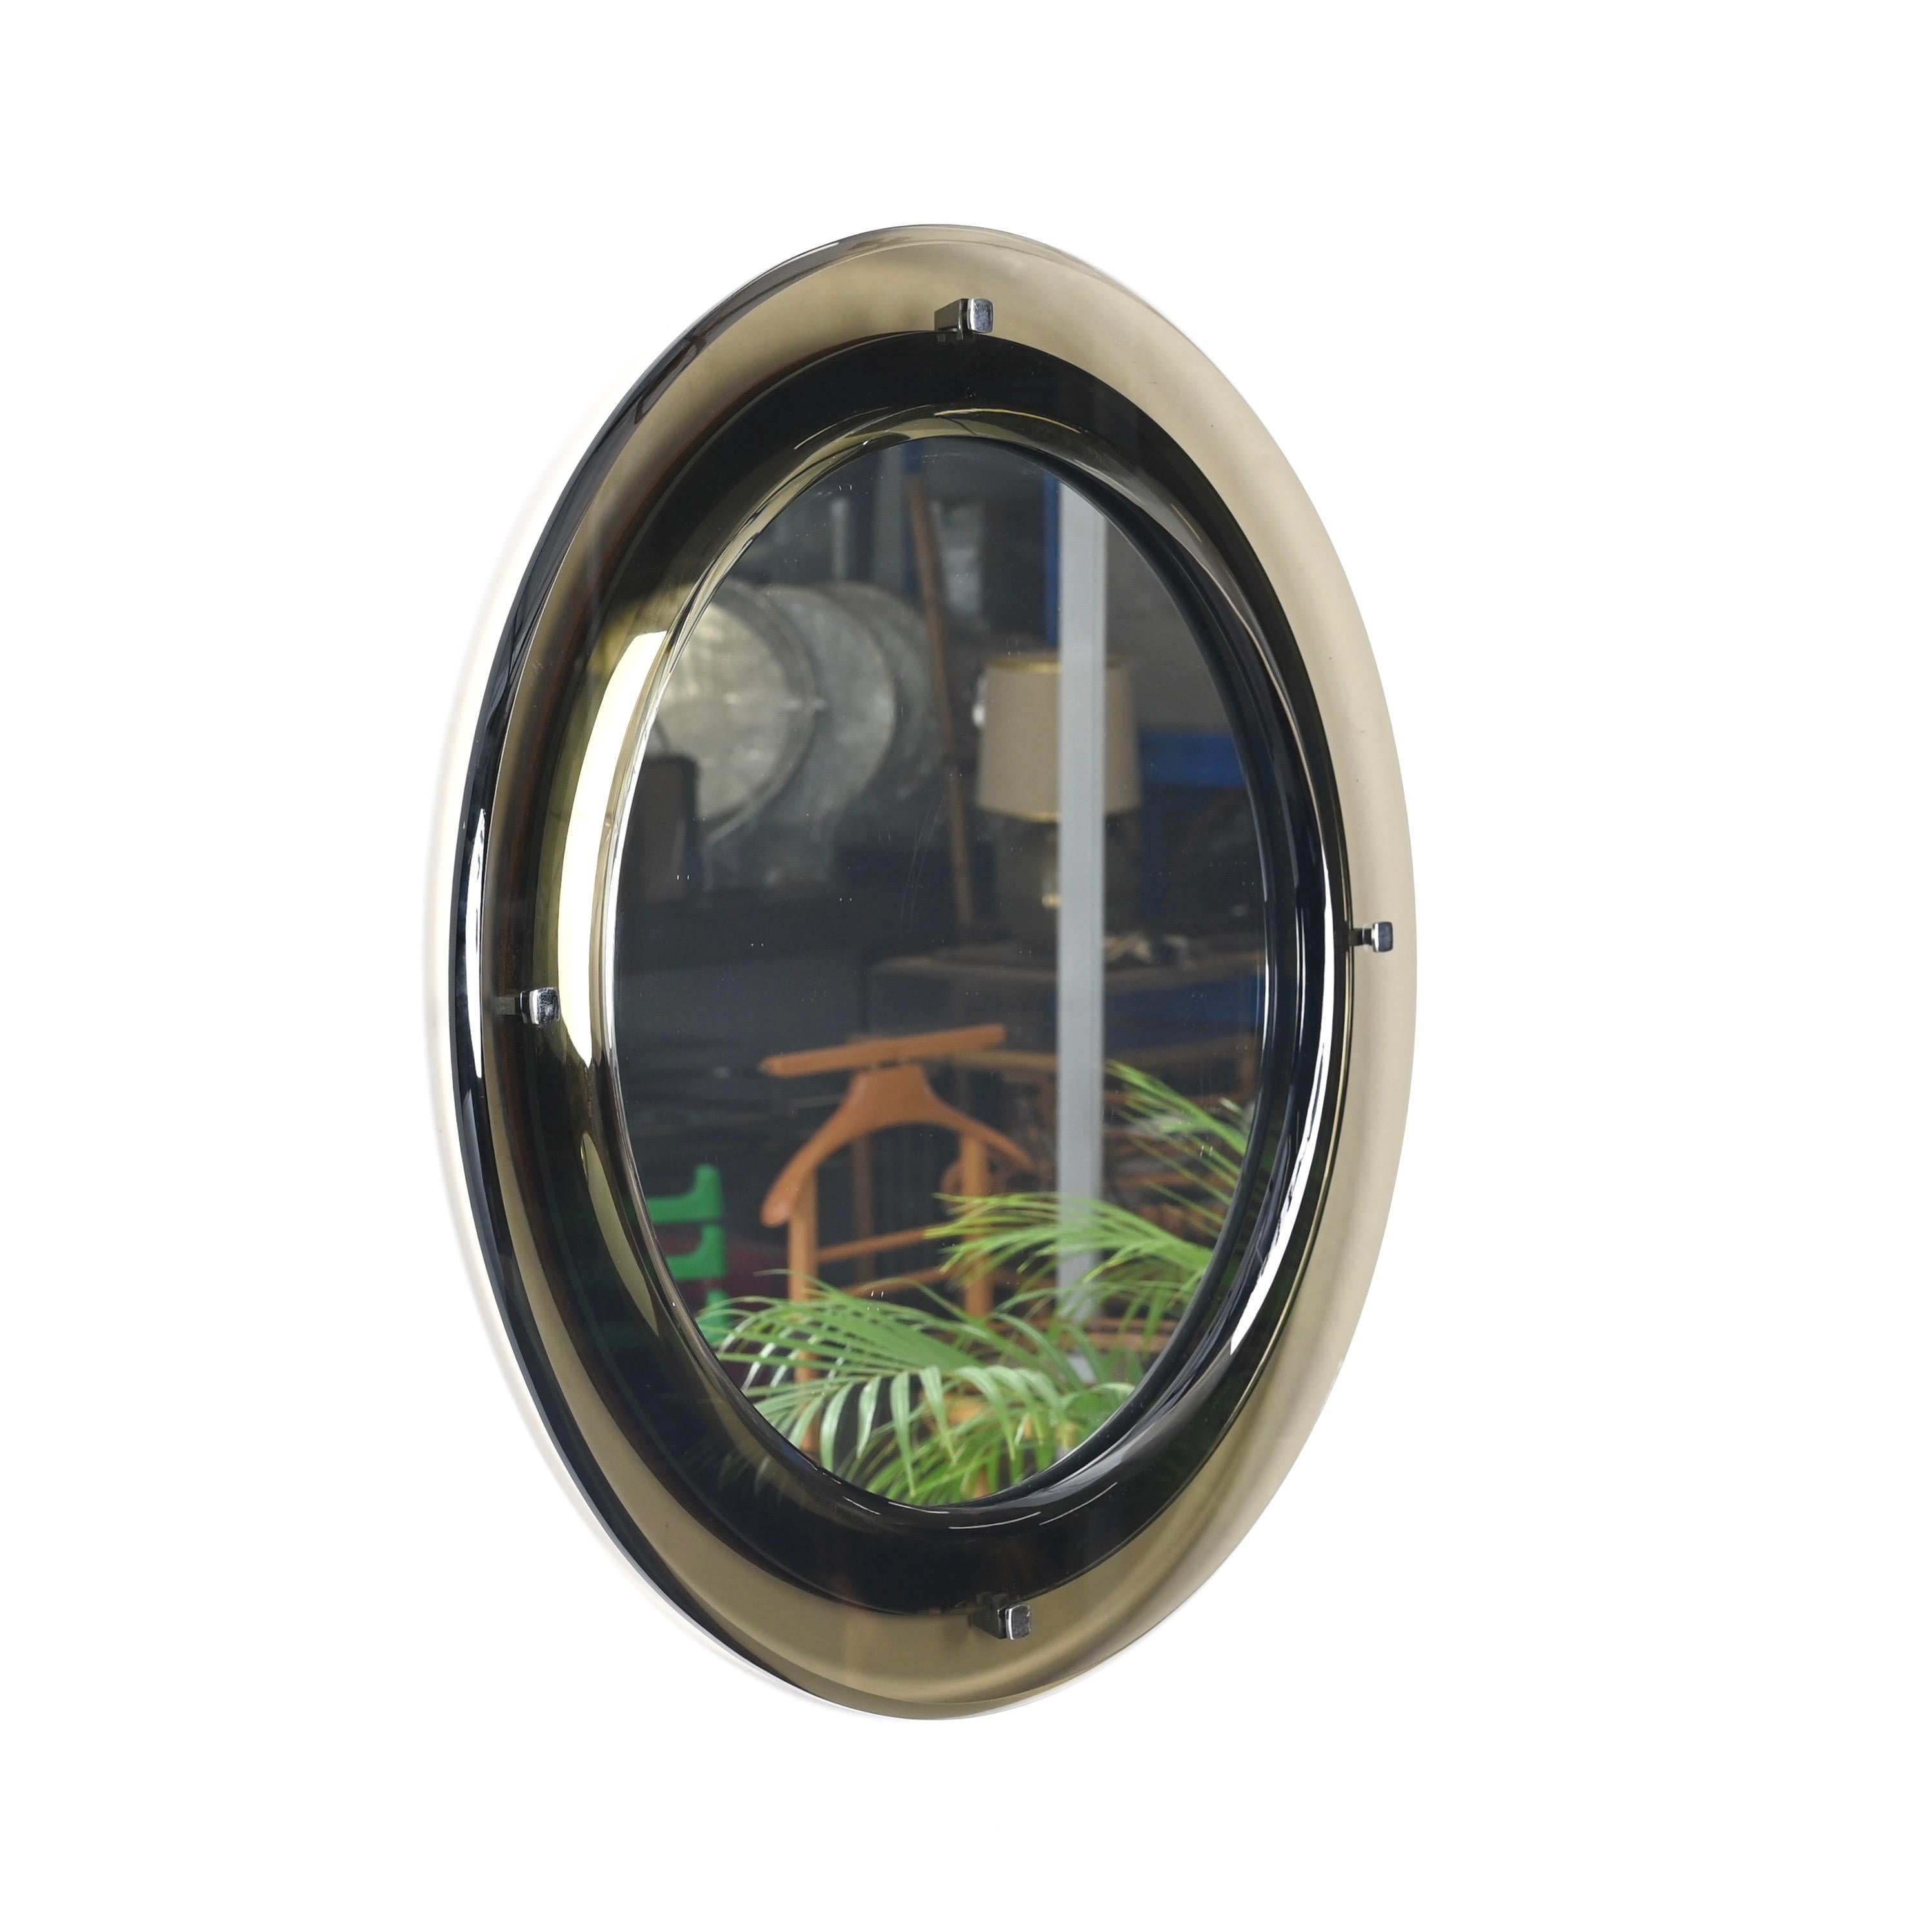 Late 20th Century Midcentury Italian Round Mirror with Beveled Smoked Glass by Sena Cristal, 1970s For Sale